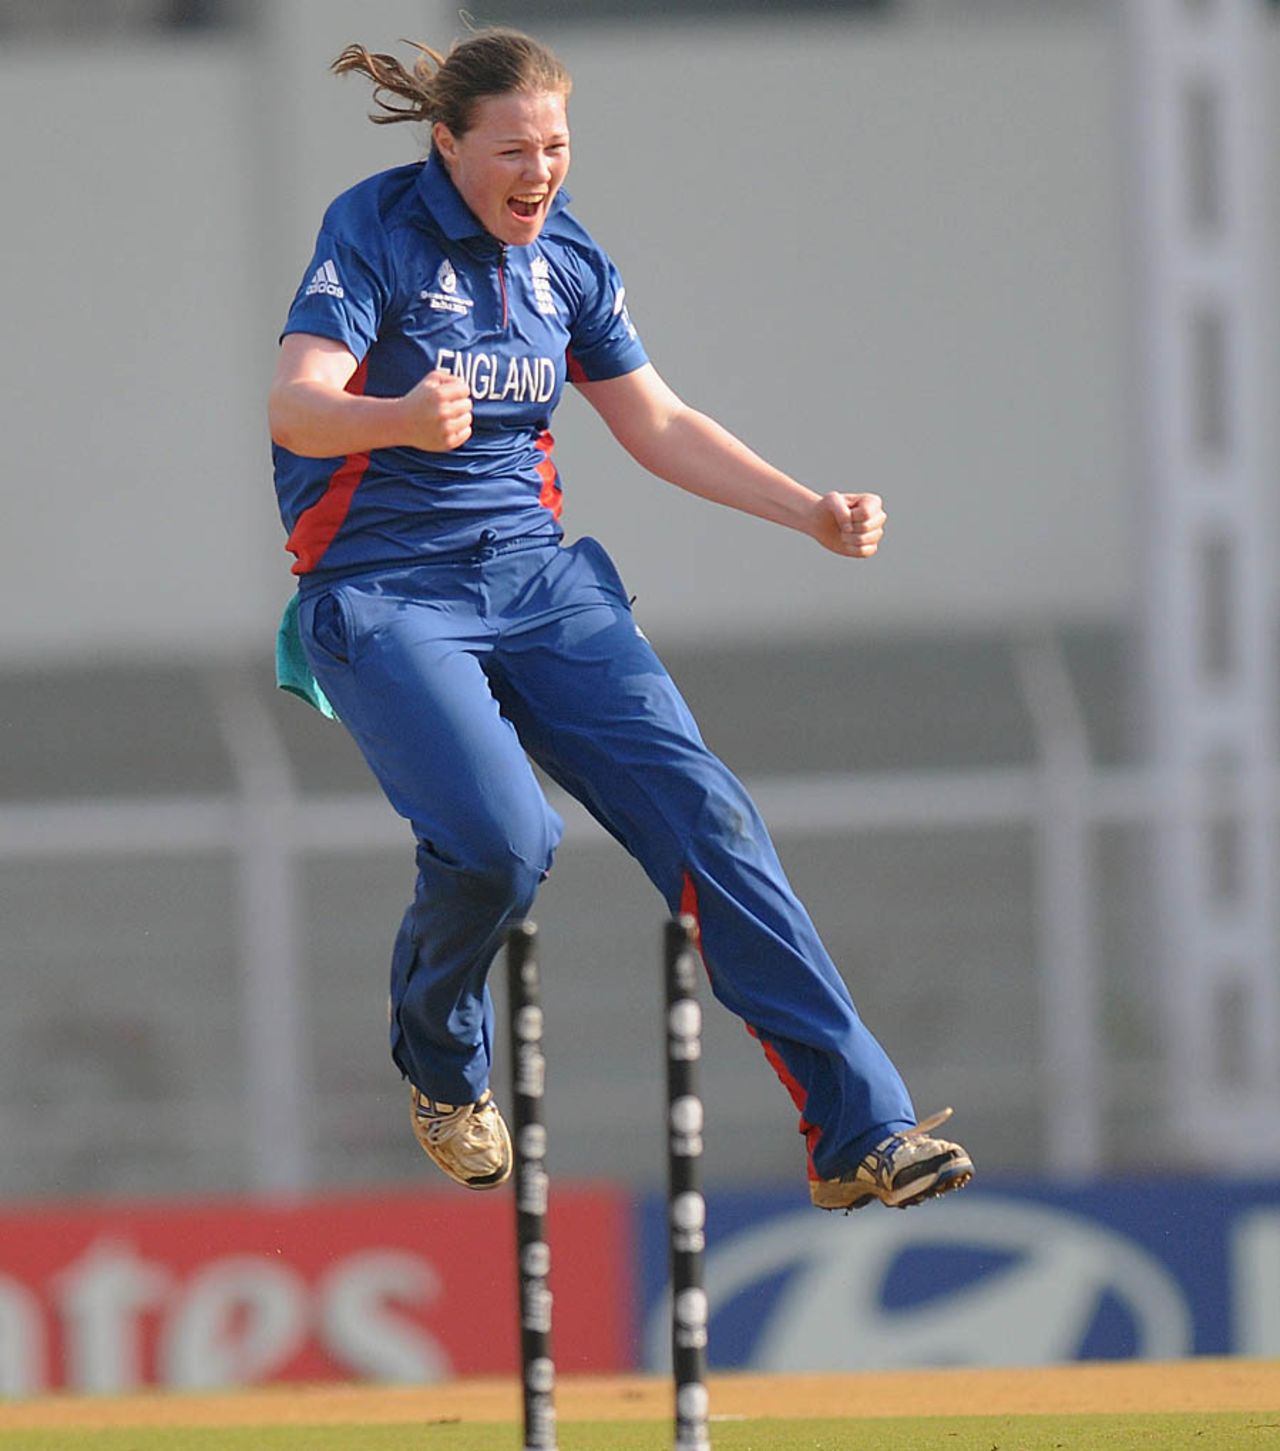 Anya Shrubsole took three wickets before taking England close to a win with a handy knock, Australia v England, Women's World Cup 2013, Super Six, February 8, 2013